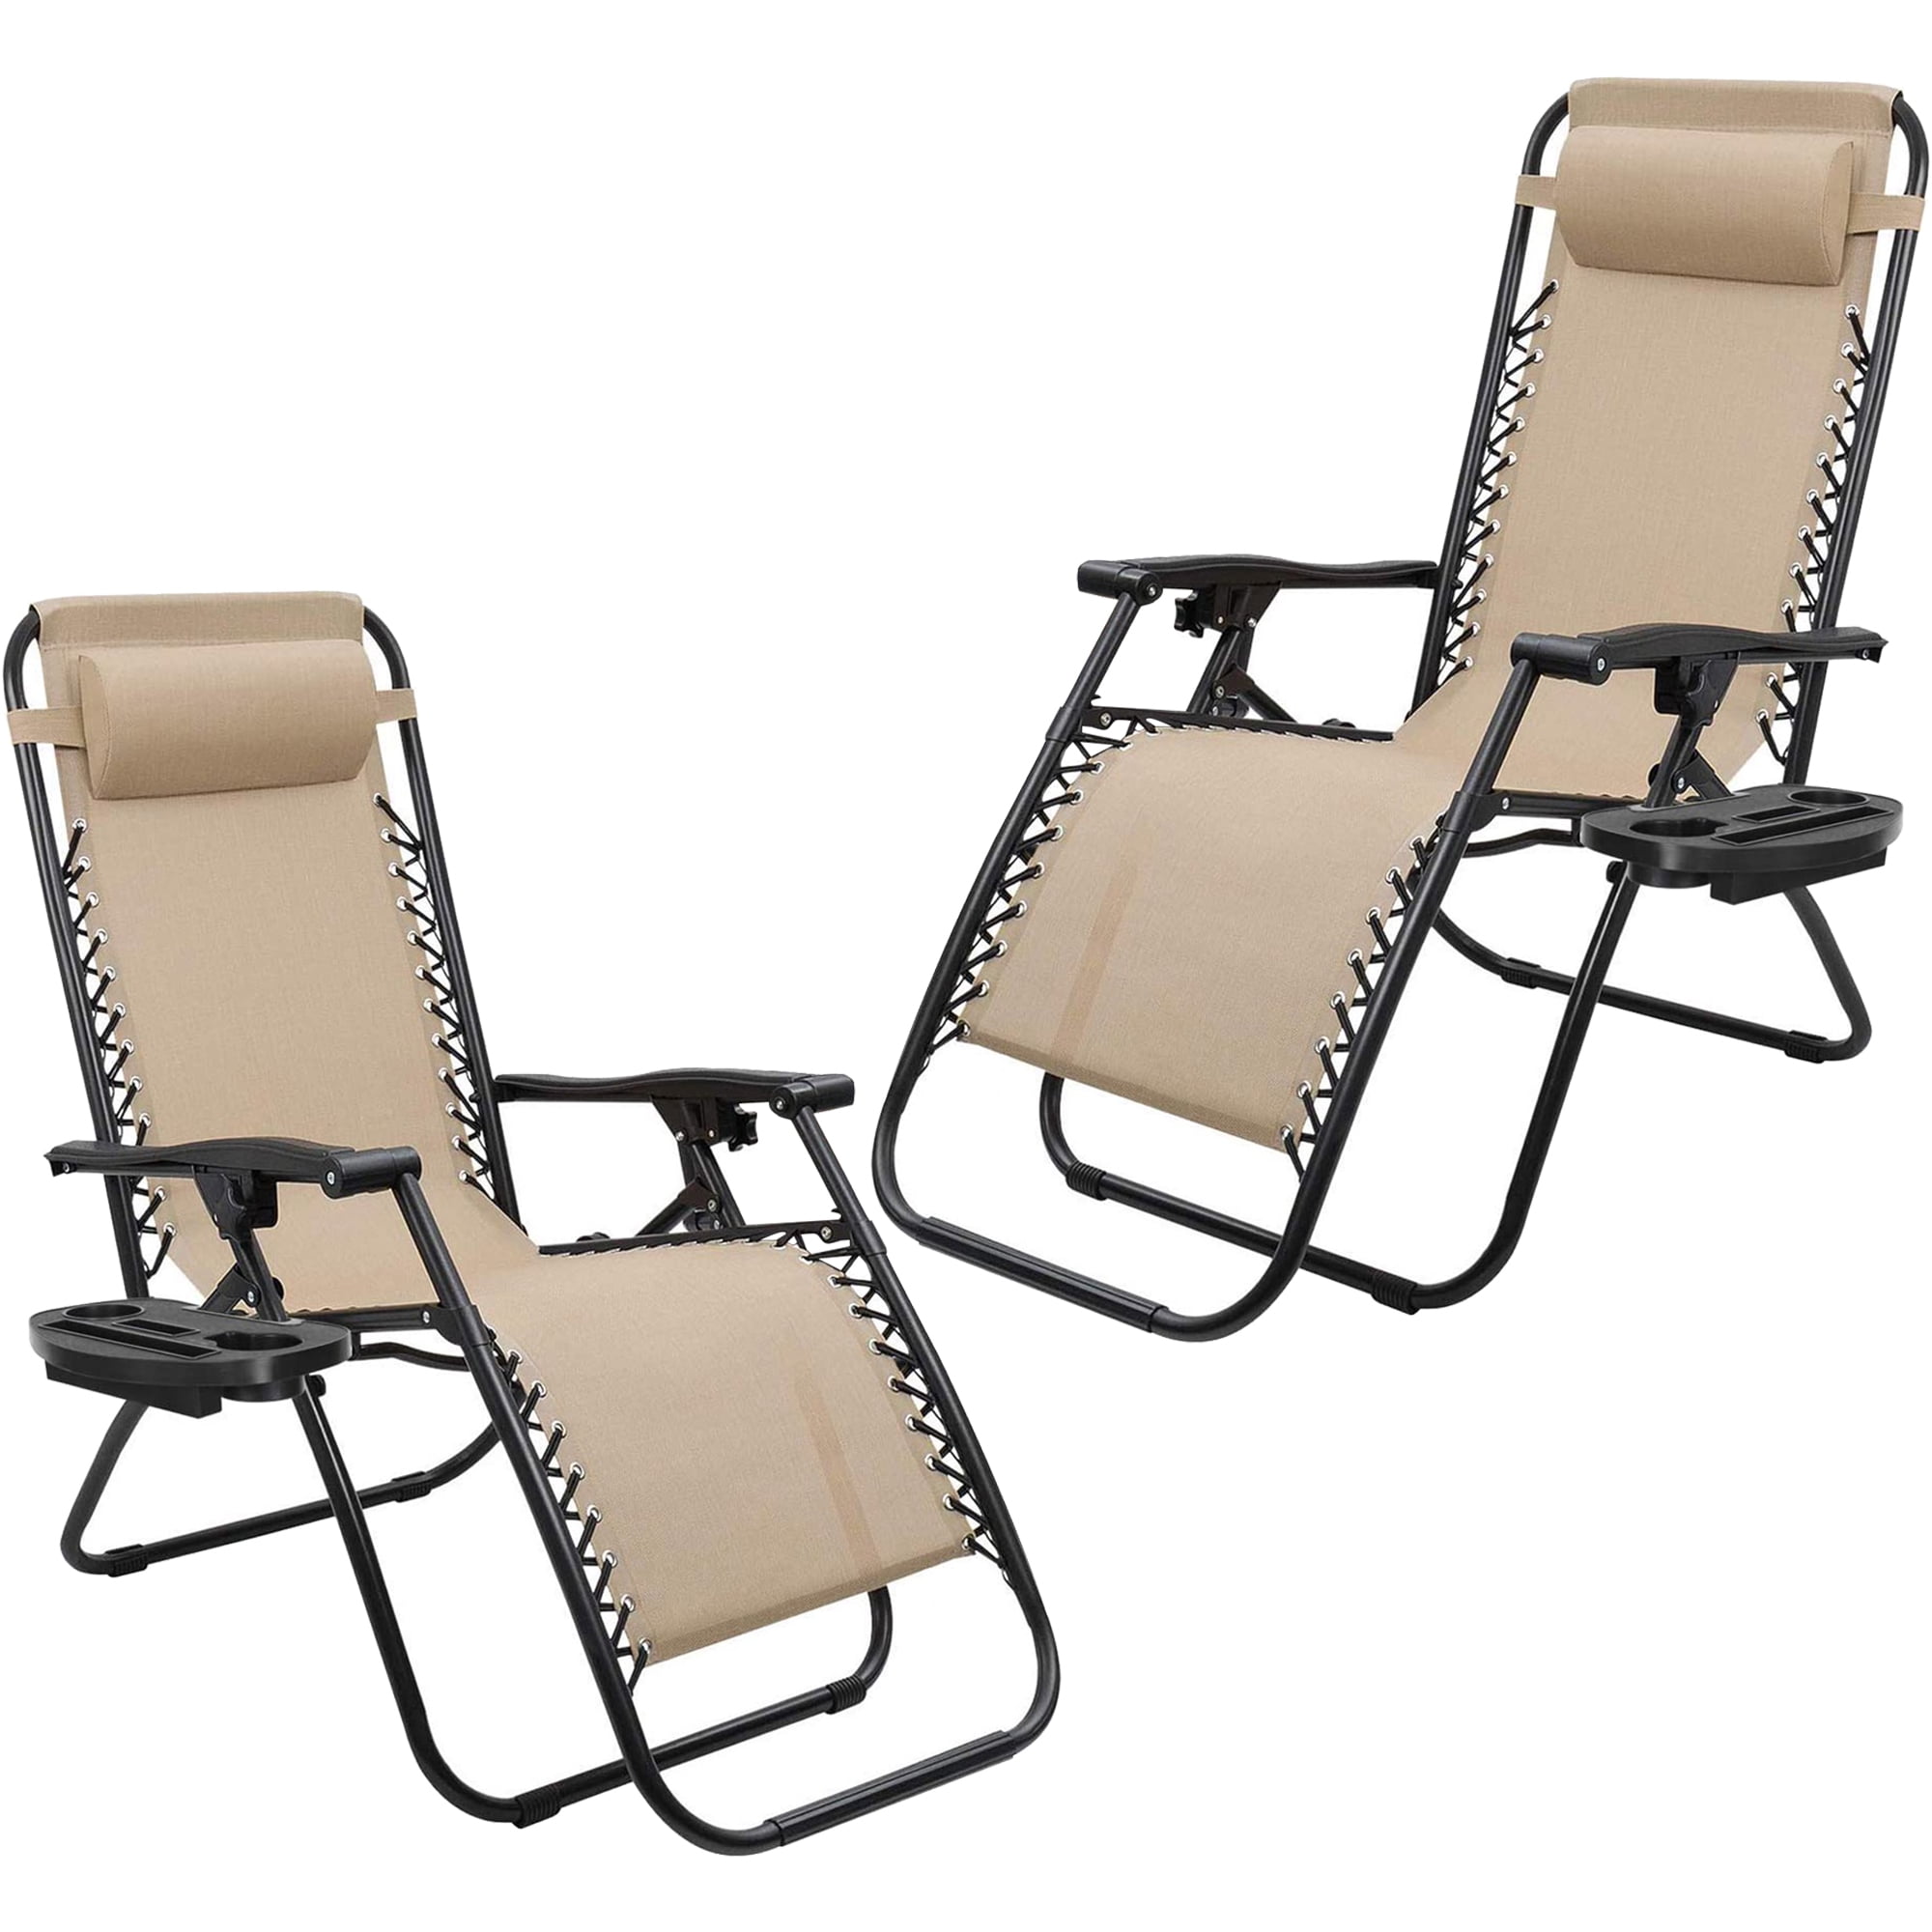 Support 200kg Extra Large Reclining Patio Chairs for Small Space Home Office Folding Lounge Chairs for Adults/Pregnant/Elderly